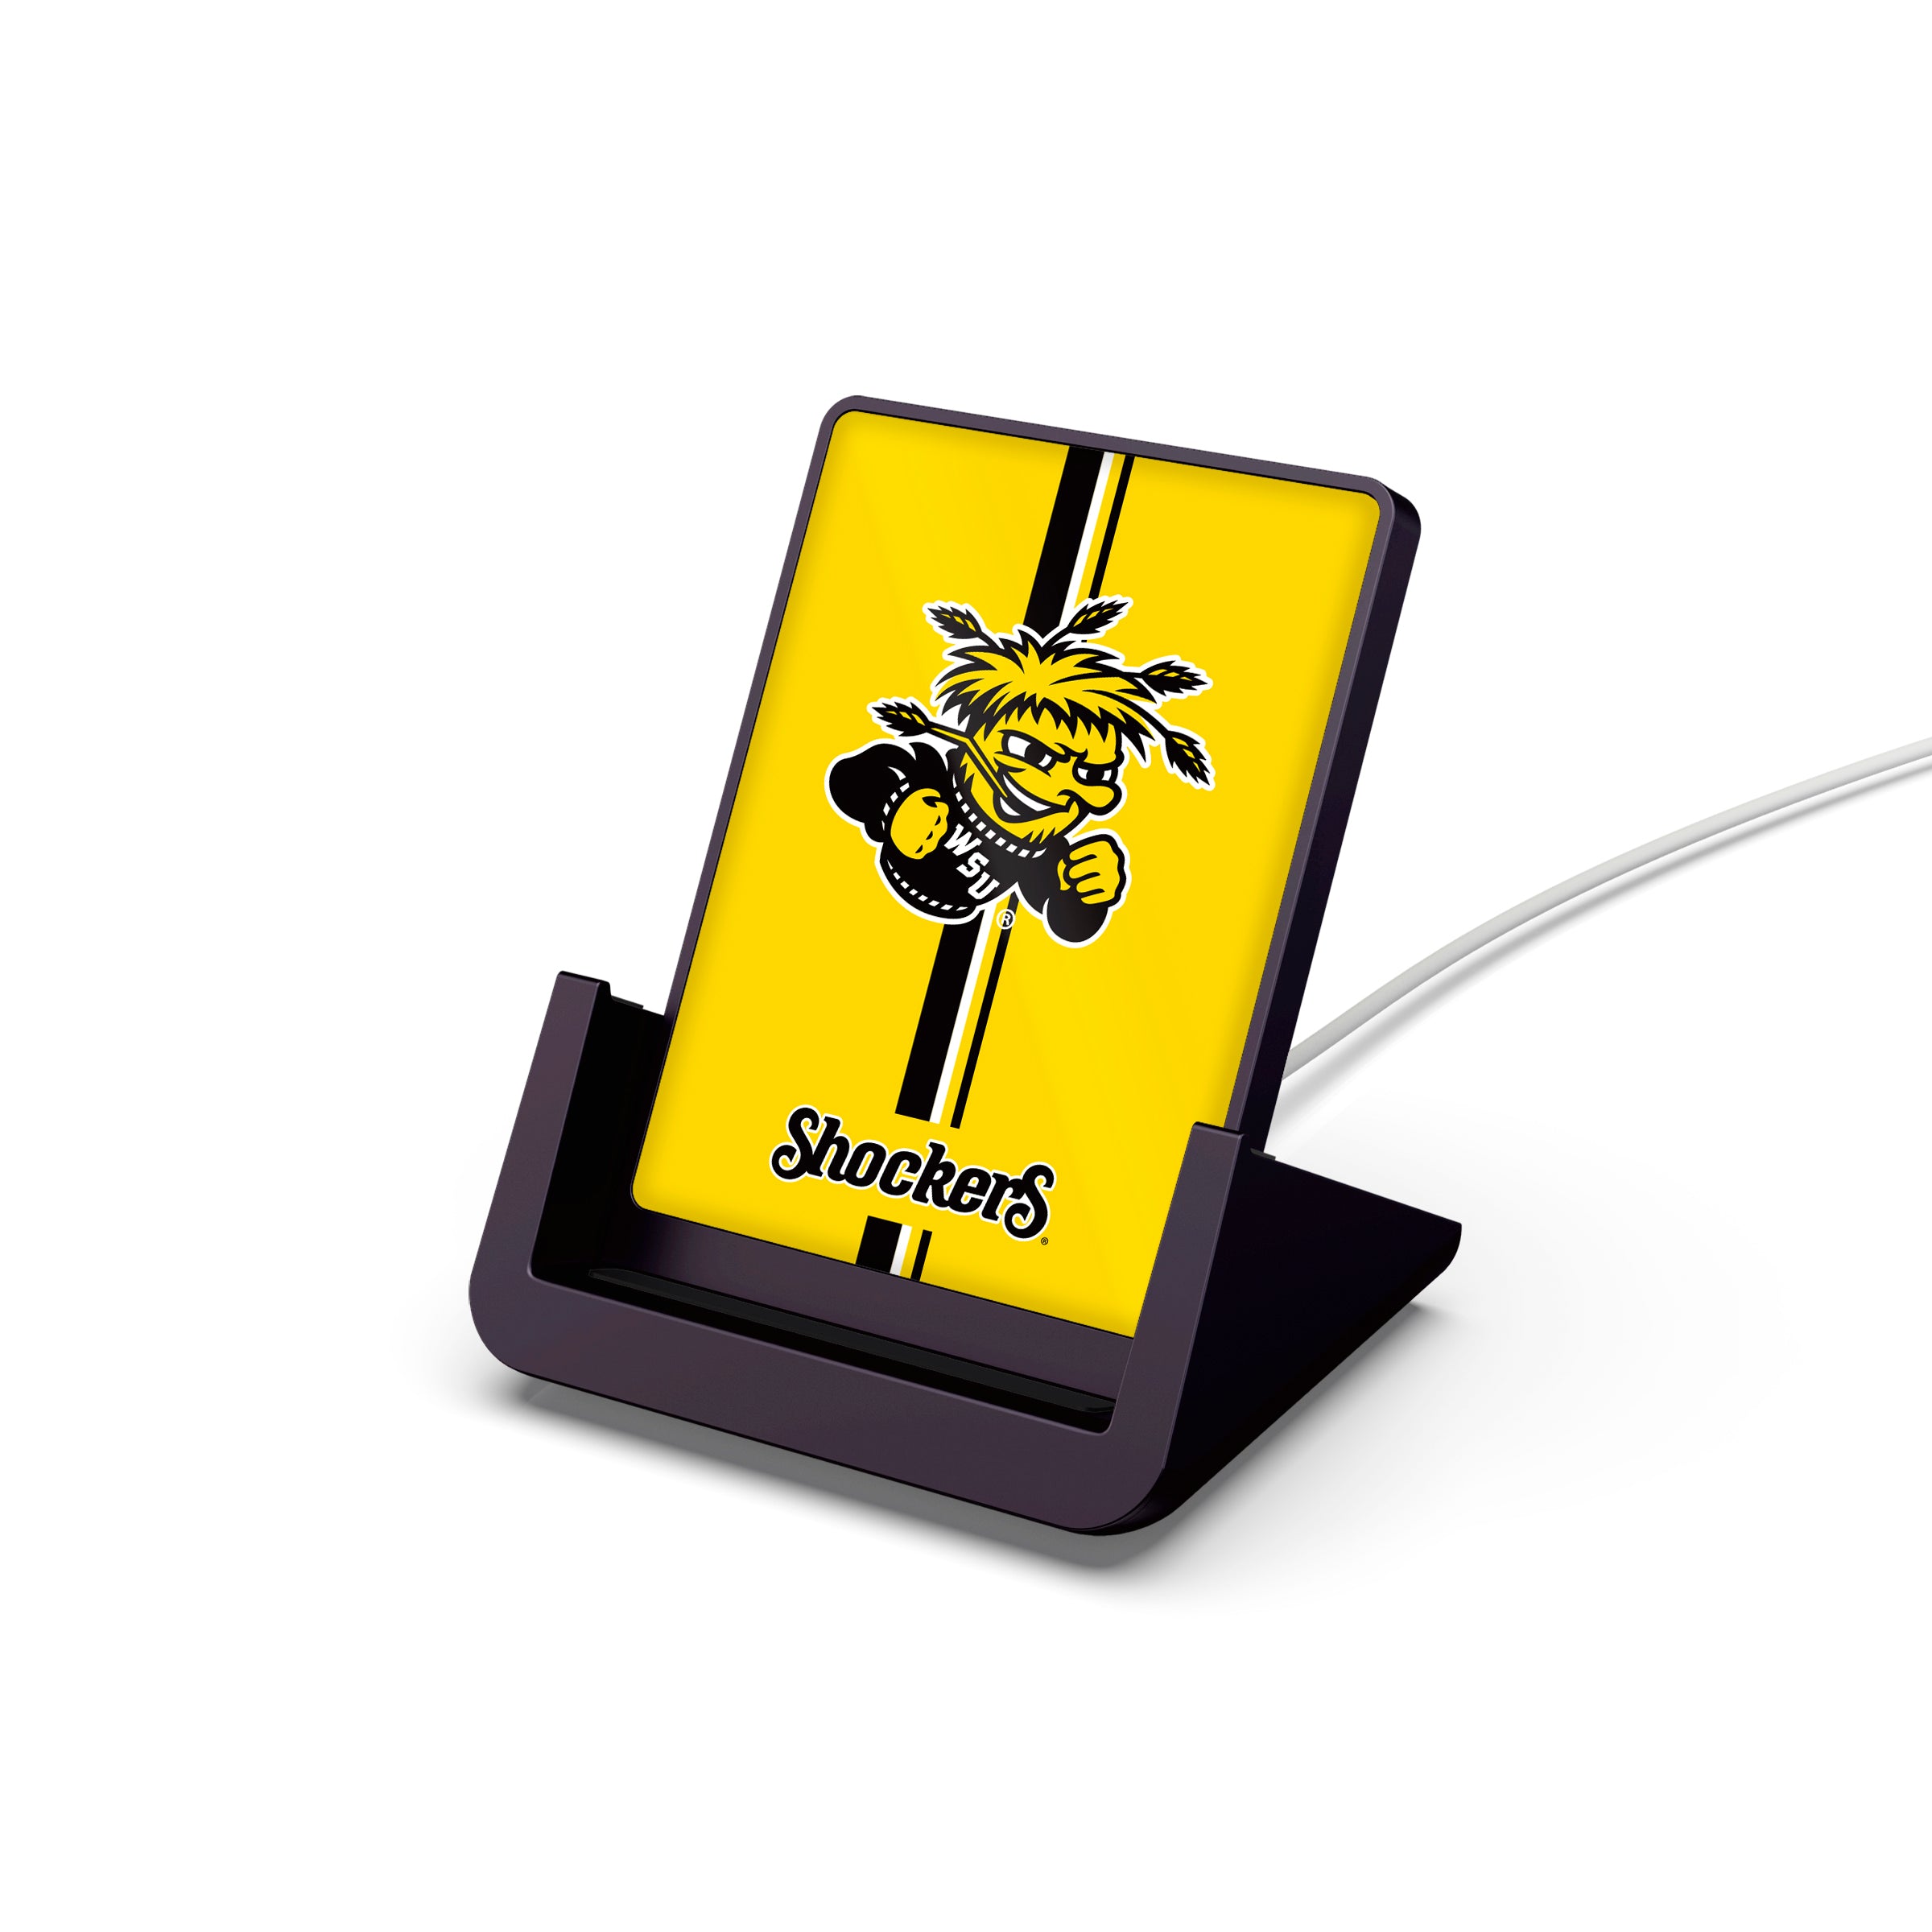 NCAA Wireless Charging Stand